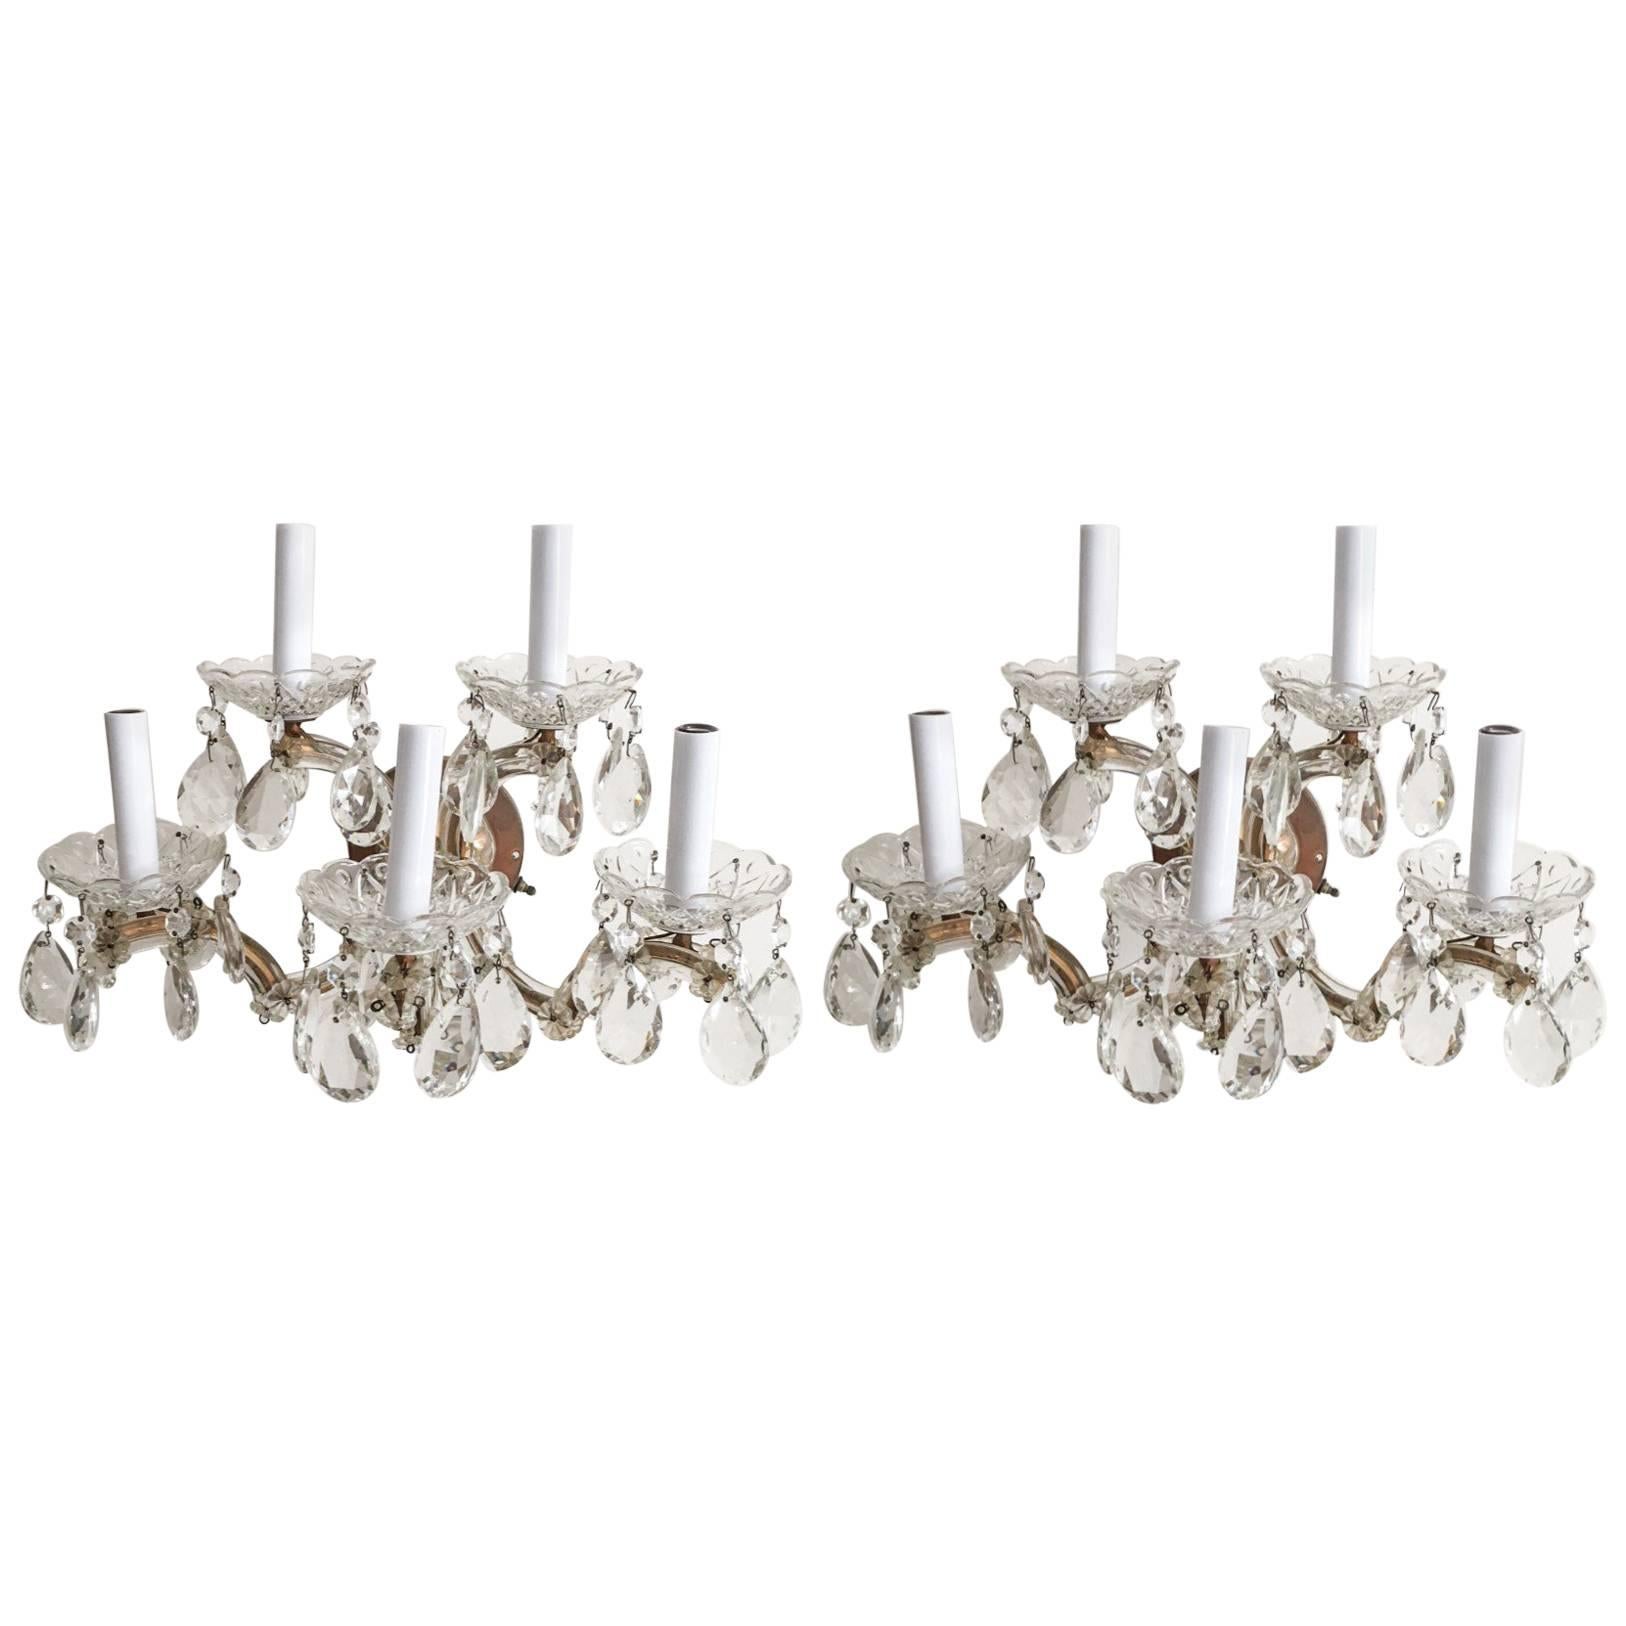 1940s Italian Crystal and Brass Five-Arm Sconces, Pair